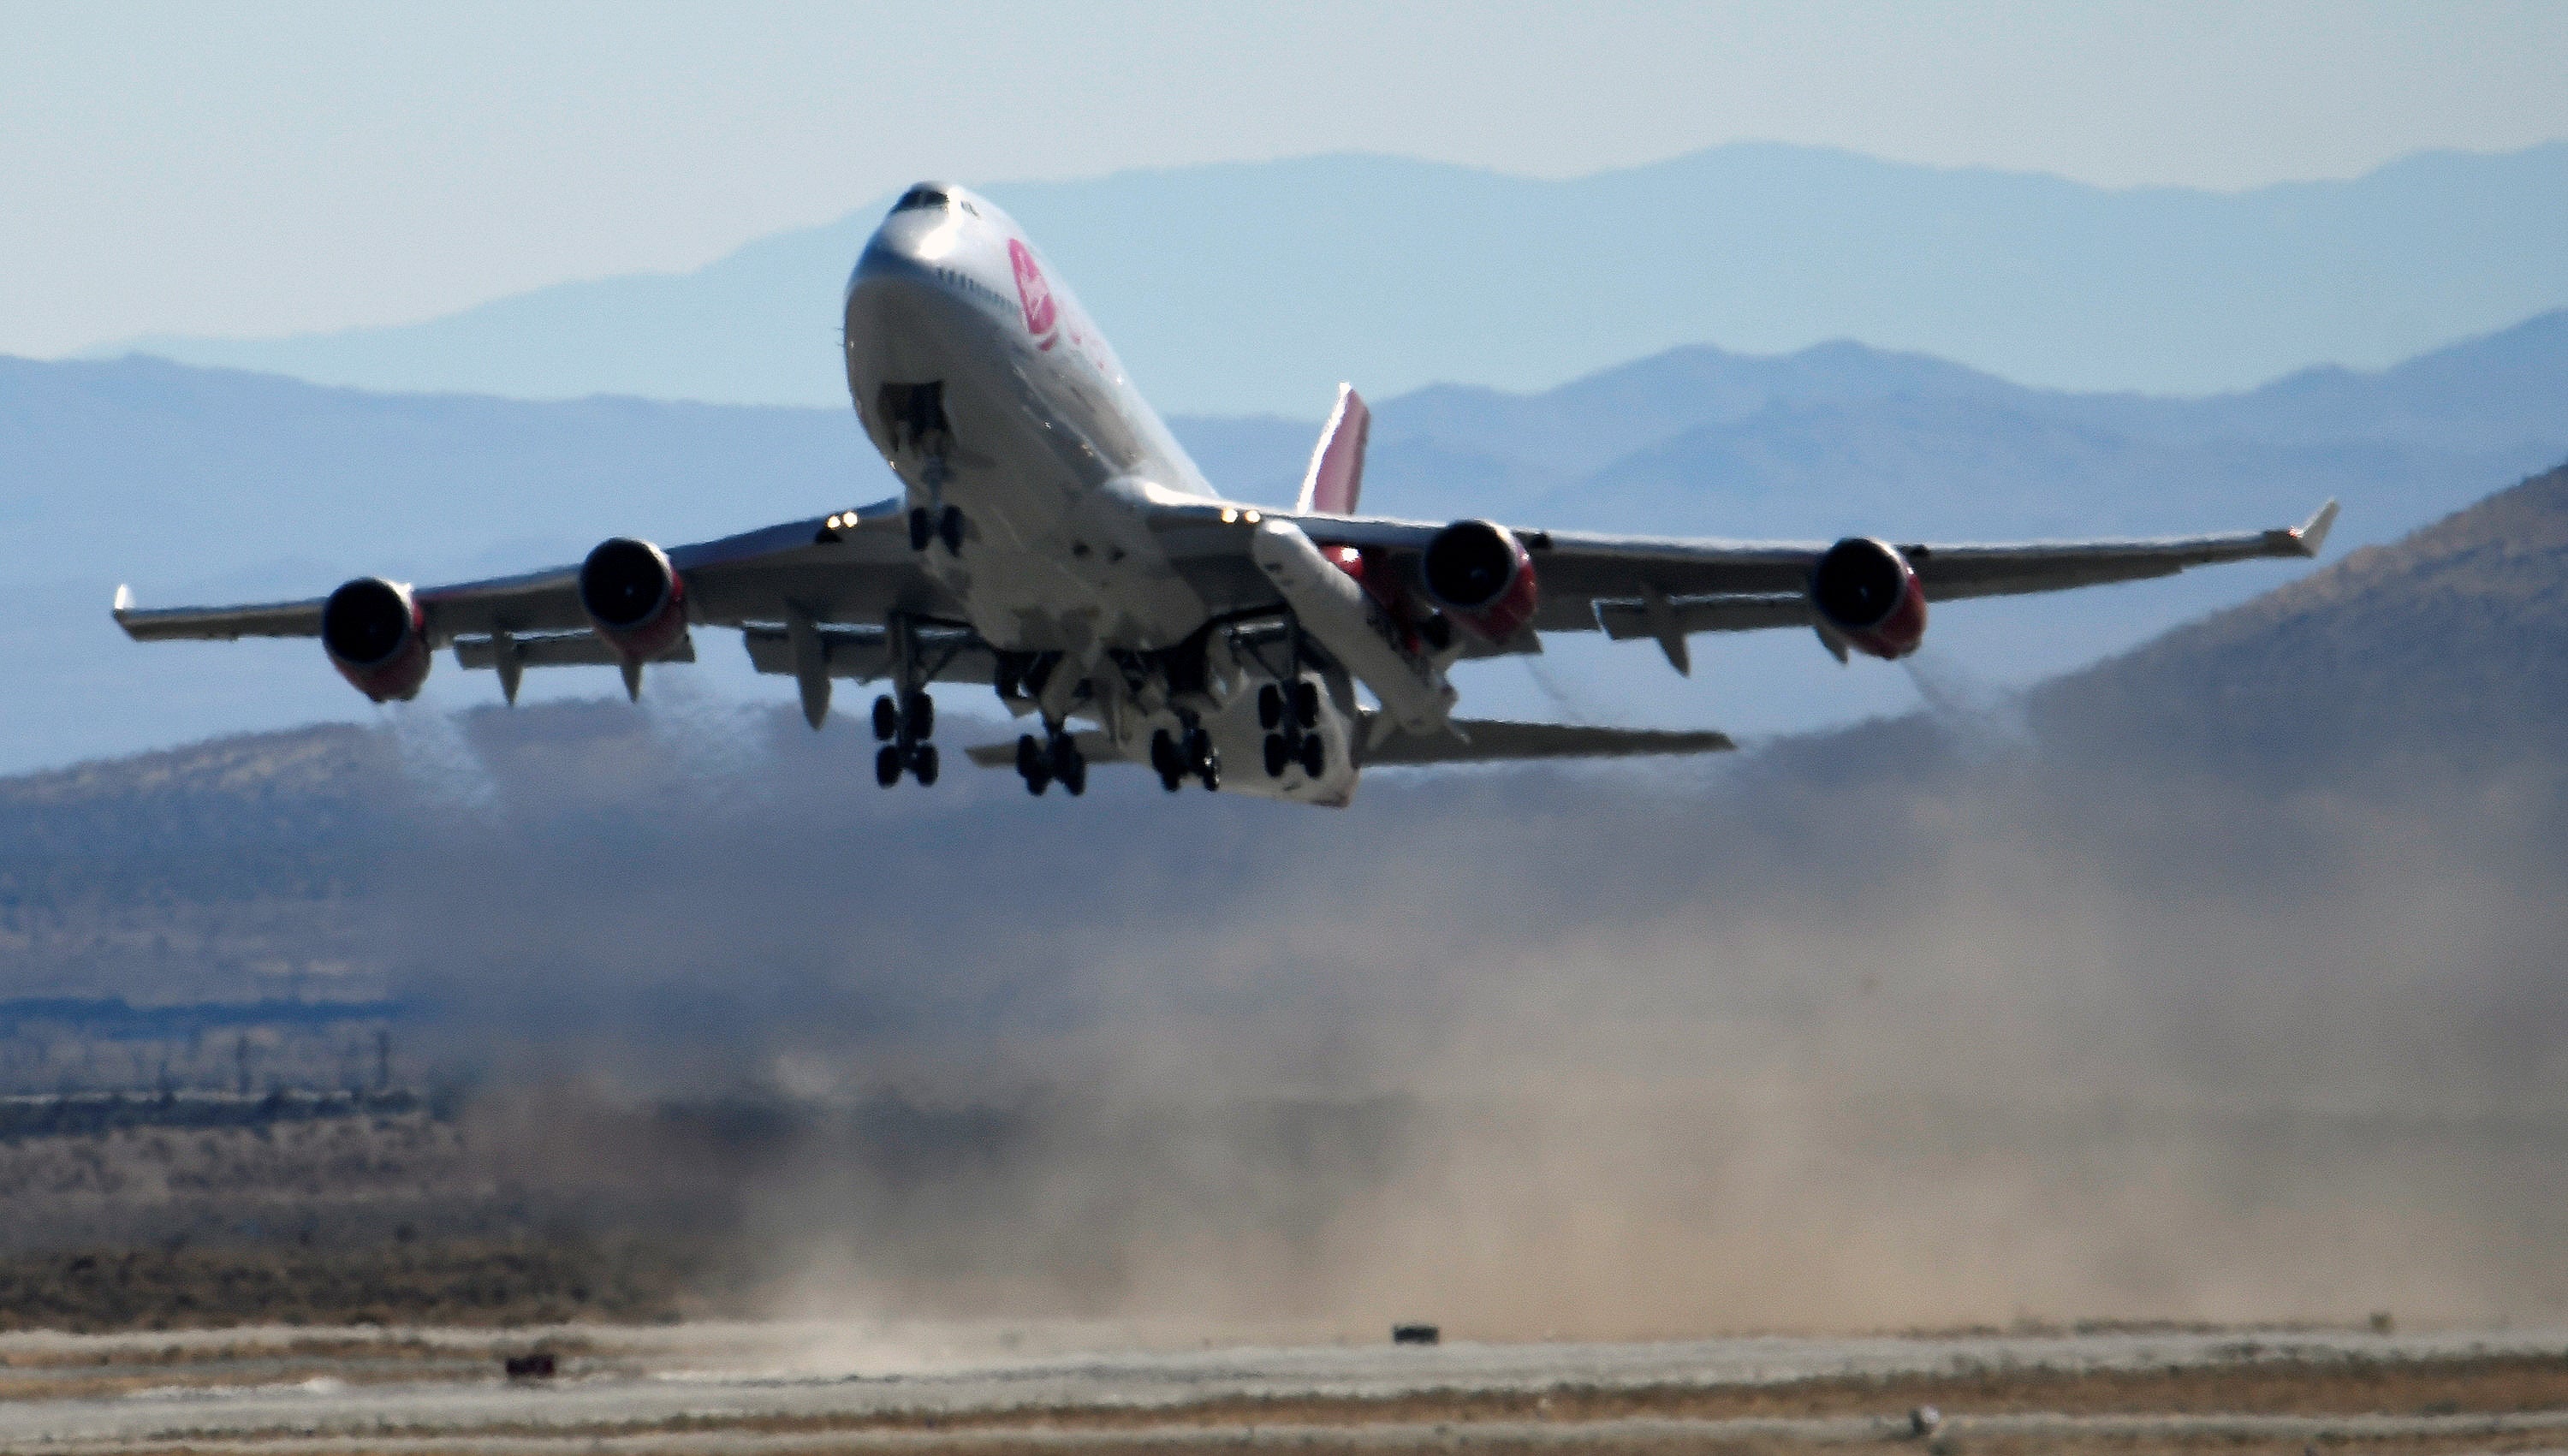 Virgin Orbit, a modified Boeing 747 jetliner carrying a rocket under its wing, during a test launch in Mojave, California